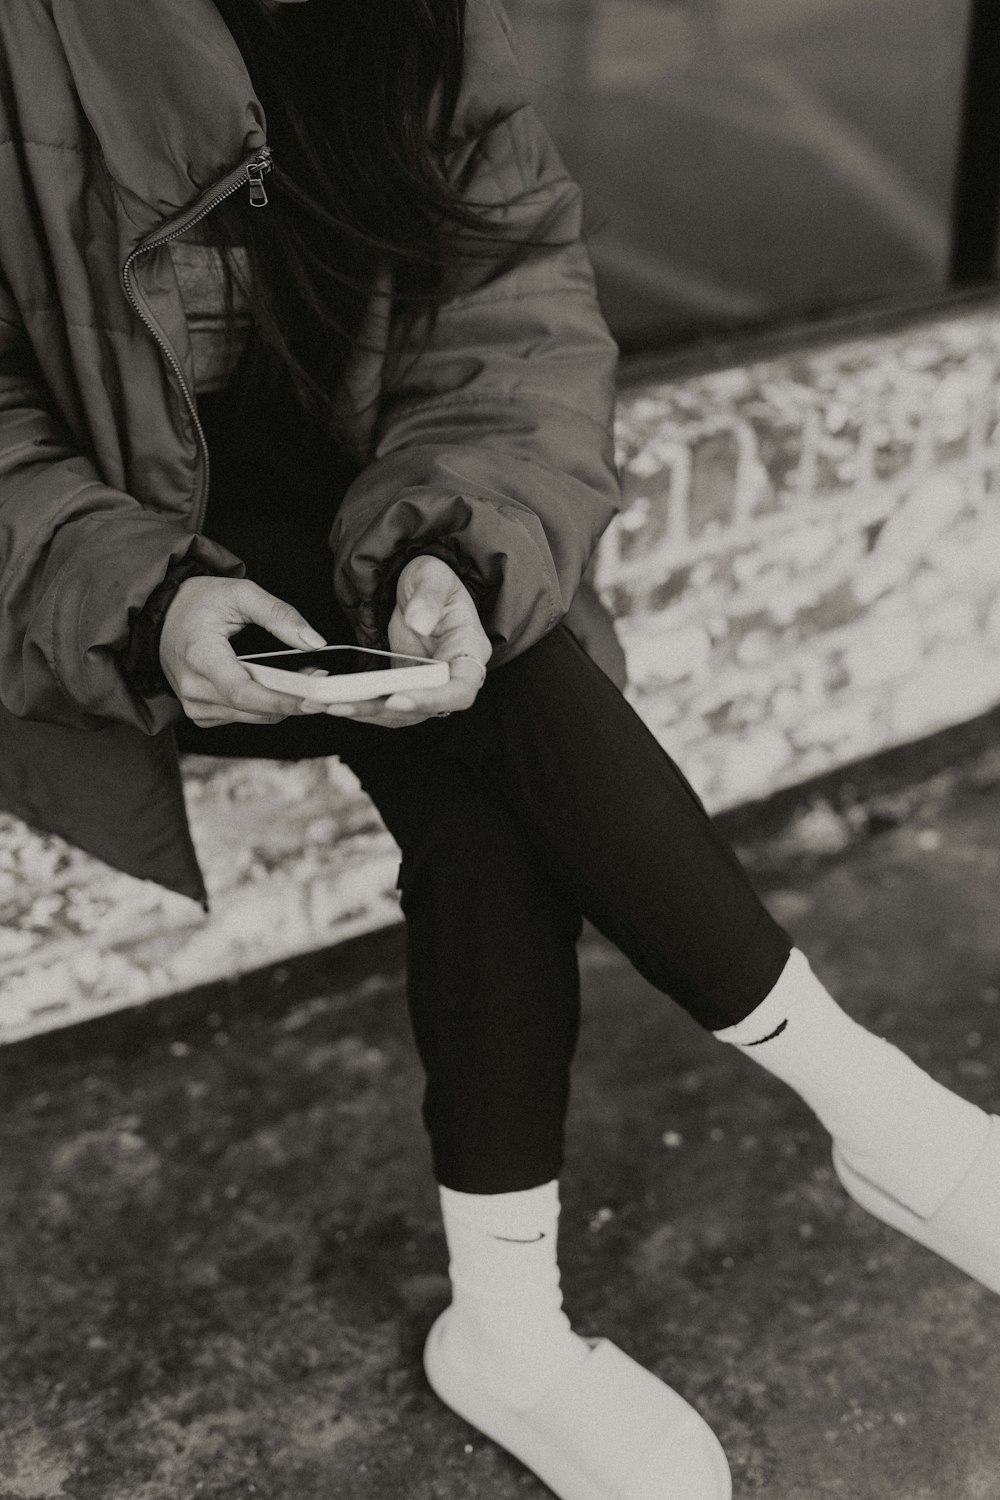 a woman sitting on a bench looking at her cell phone